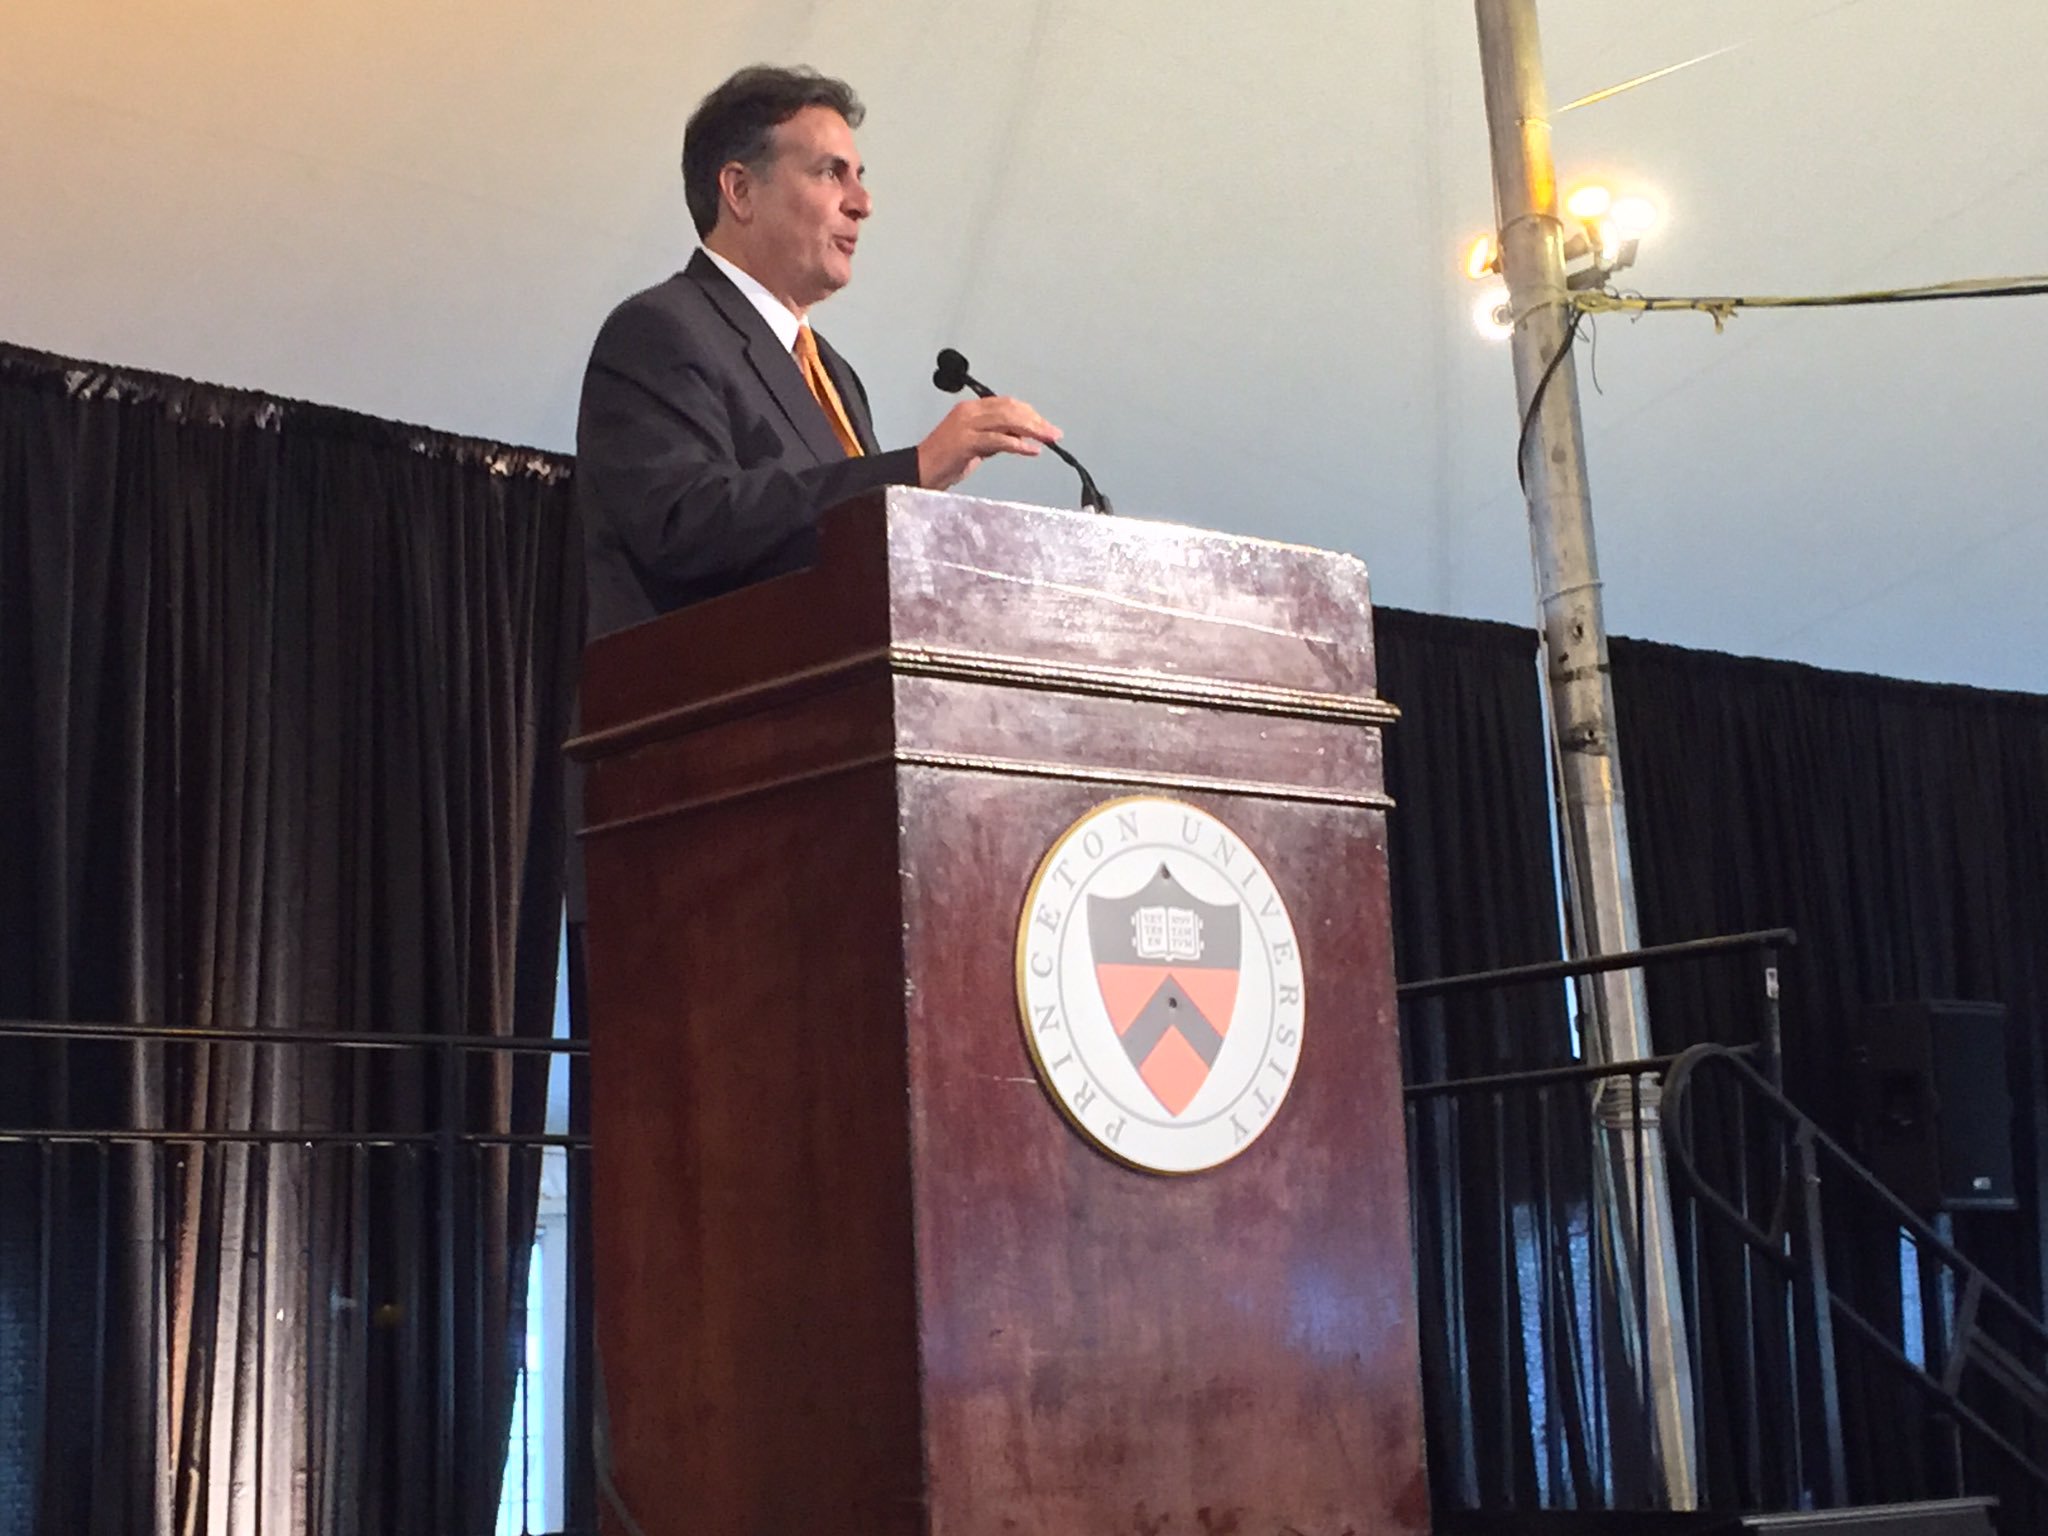 "There is hope if we commit ourselves to hope!" Eduardo Bhatia '86 ¡Adelante Tigres! #AdelantePrinceton https://t.co/JZabrHHLY6